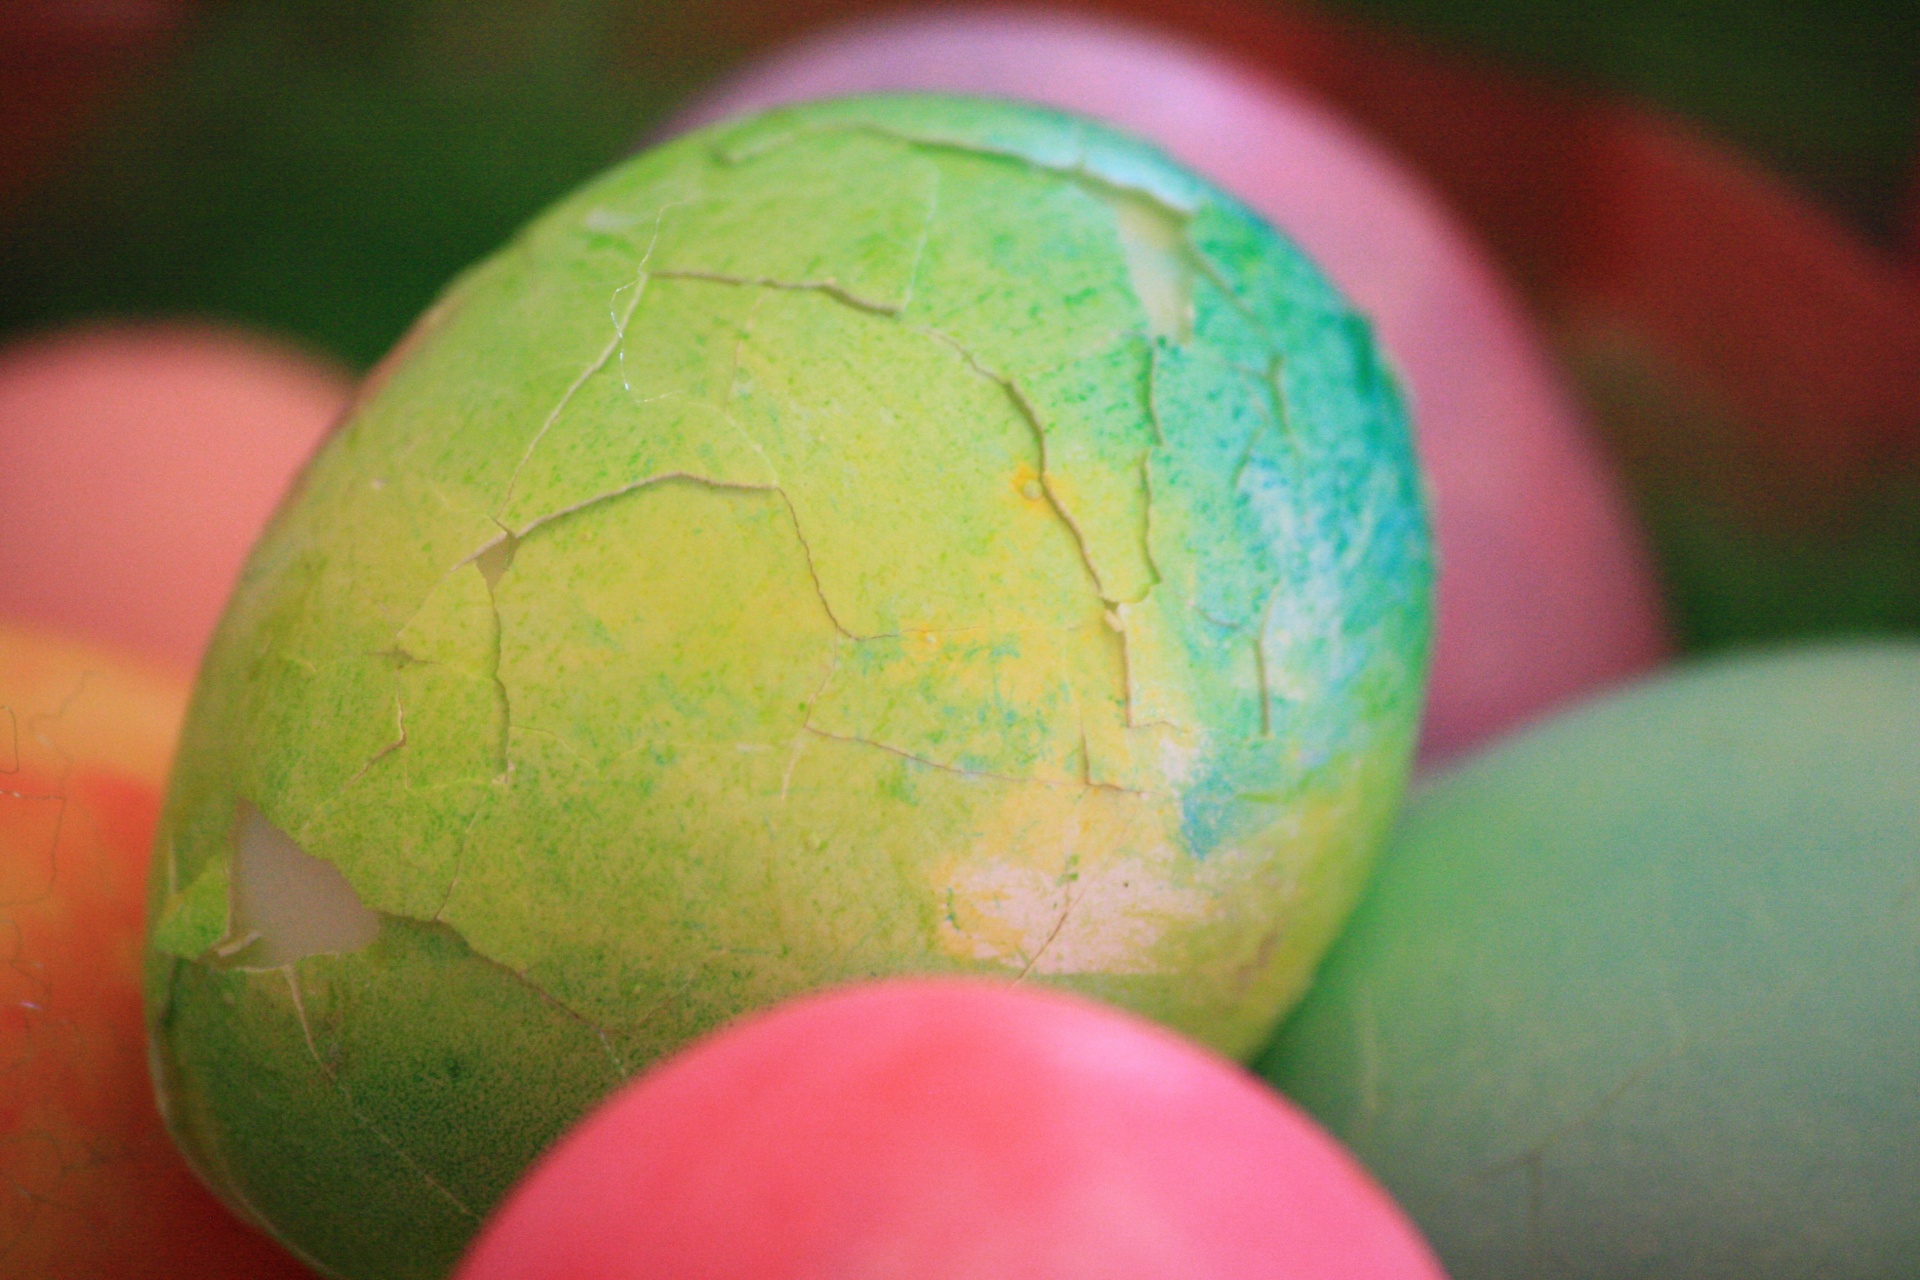 egg cracked colors free photo